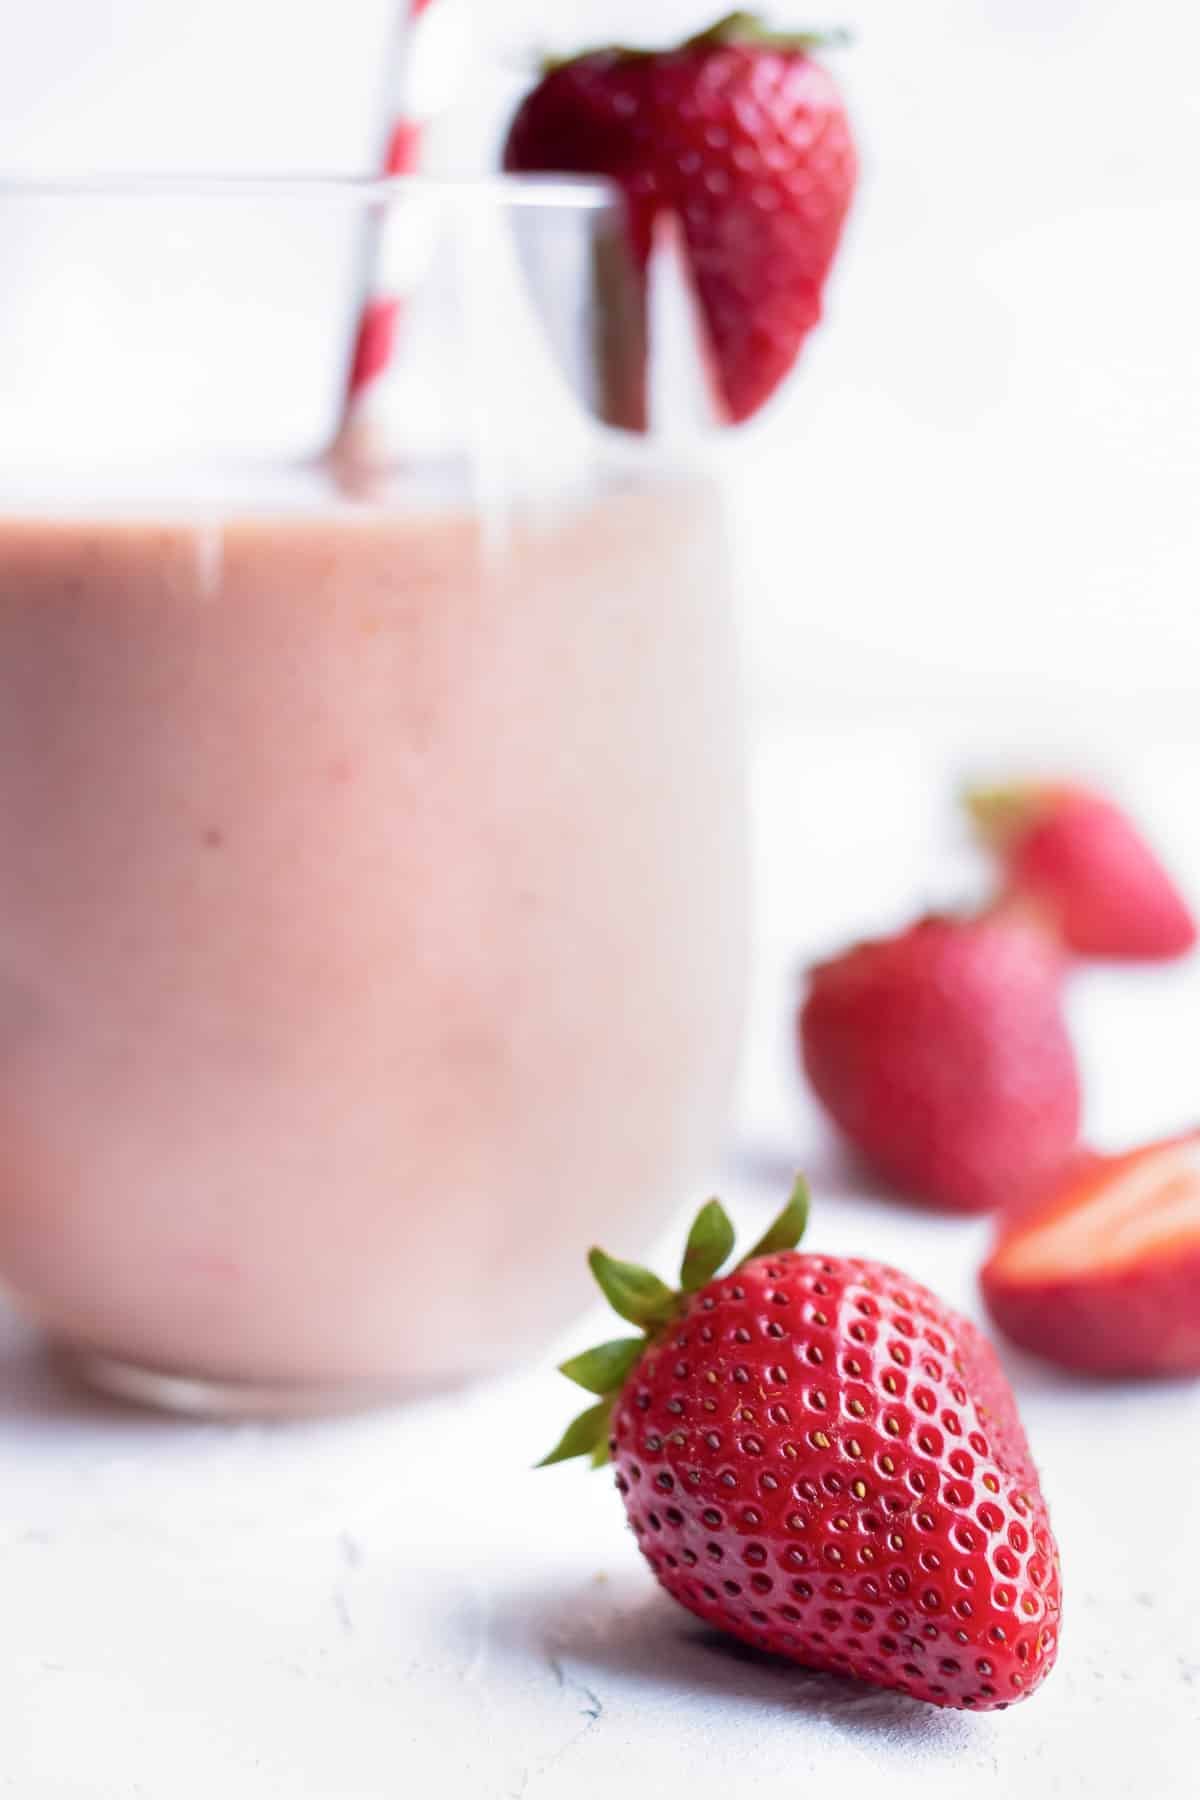 Fresh strawberries lying next to a glass full of a smoothie recipe.